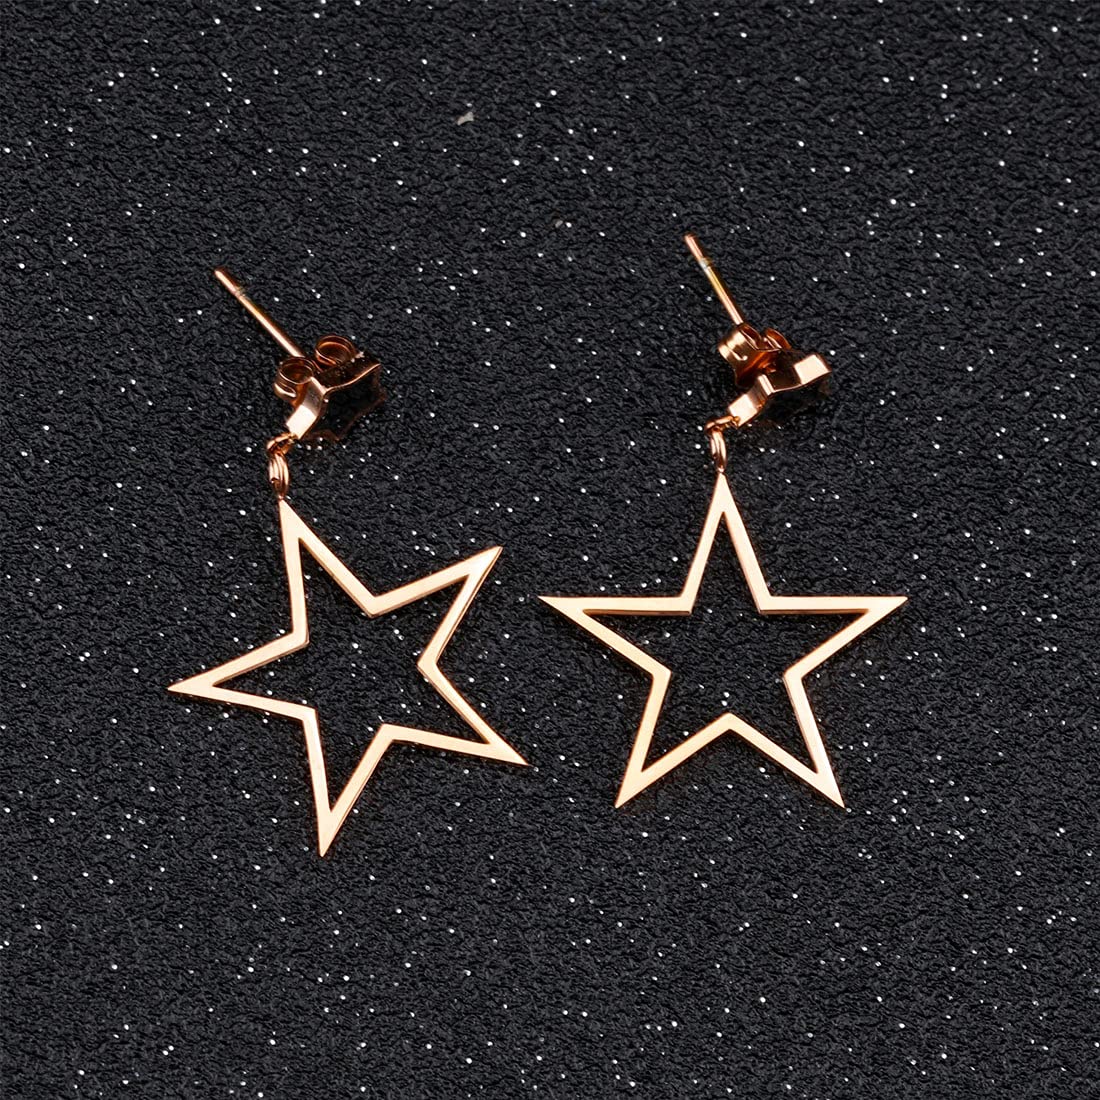 Yellow Chimes Drop Earrings for Women Rose Gold Plated Stainless Steel Star Shaped Statement style Drop Earrings for Women and Girls